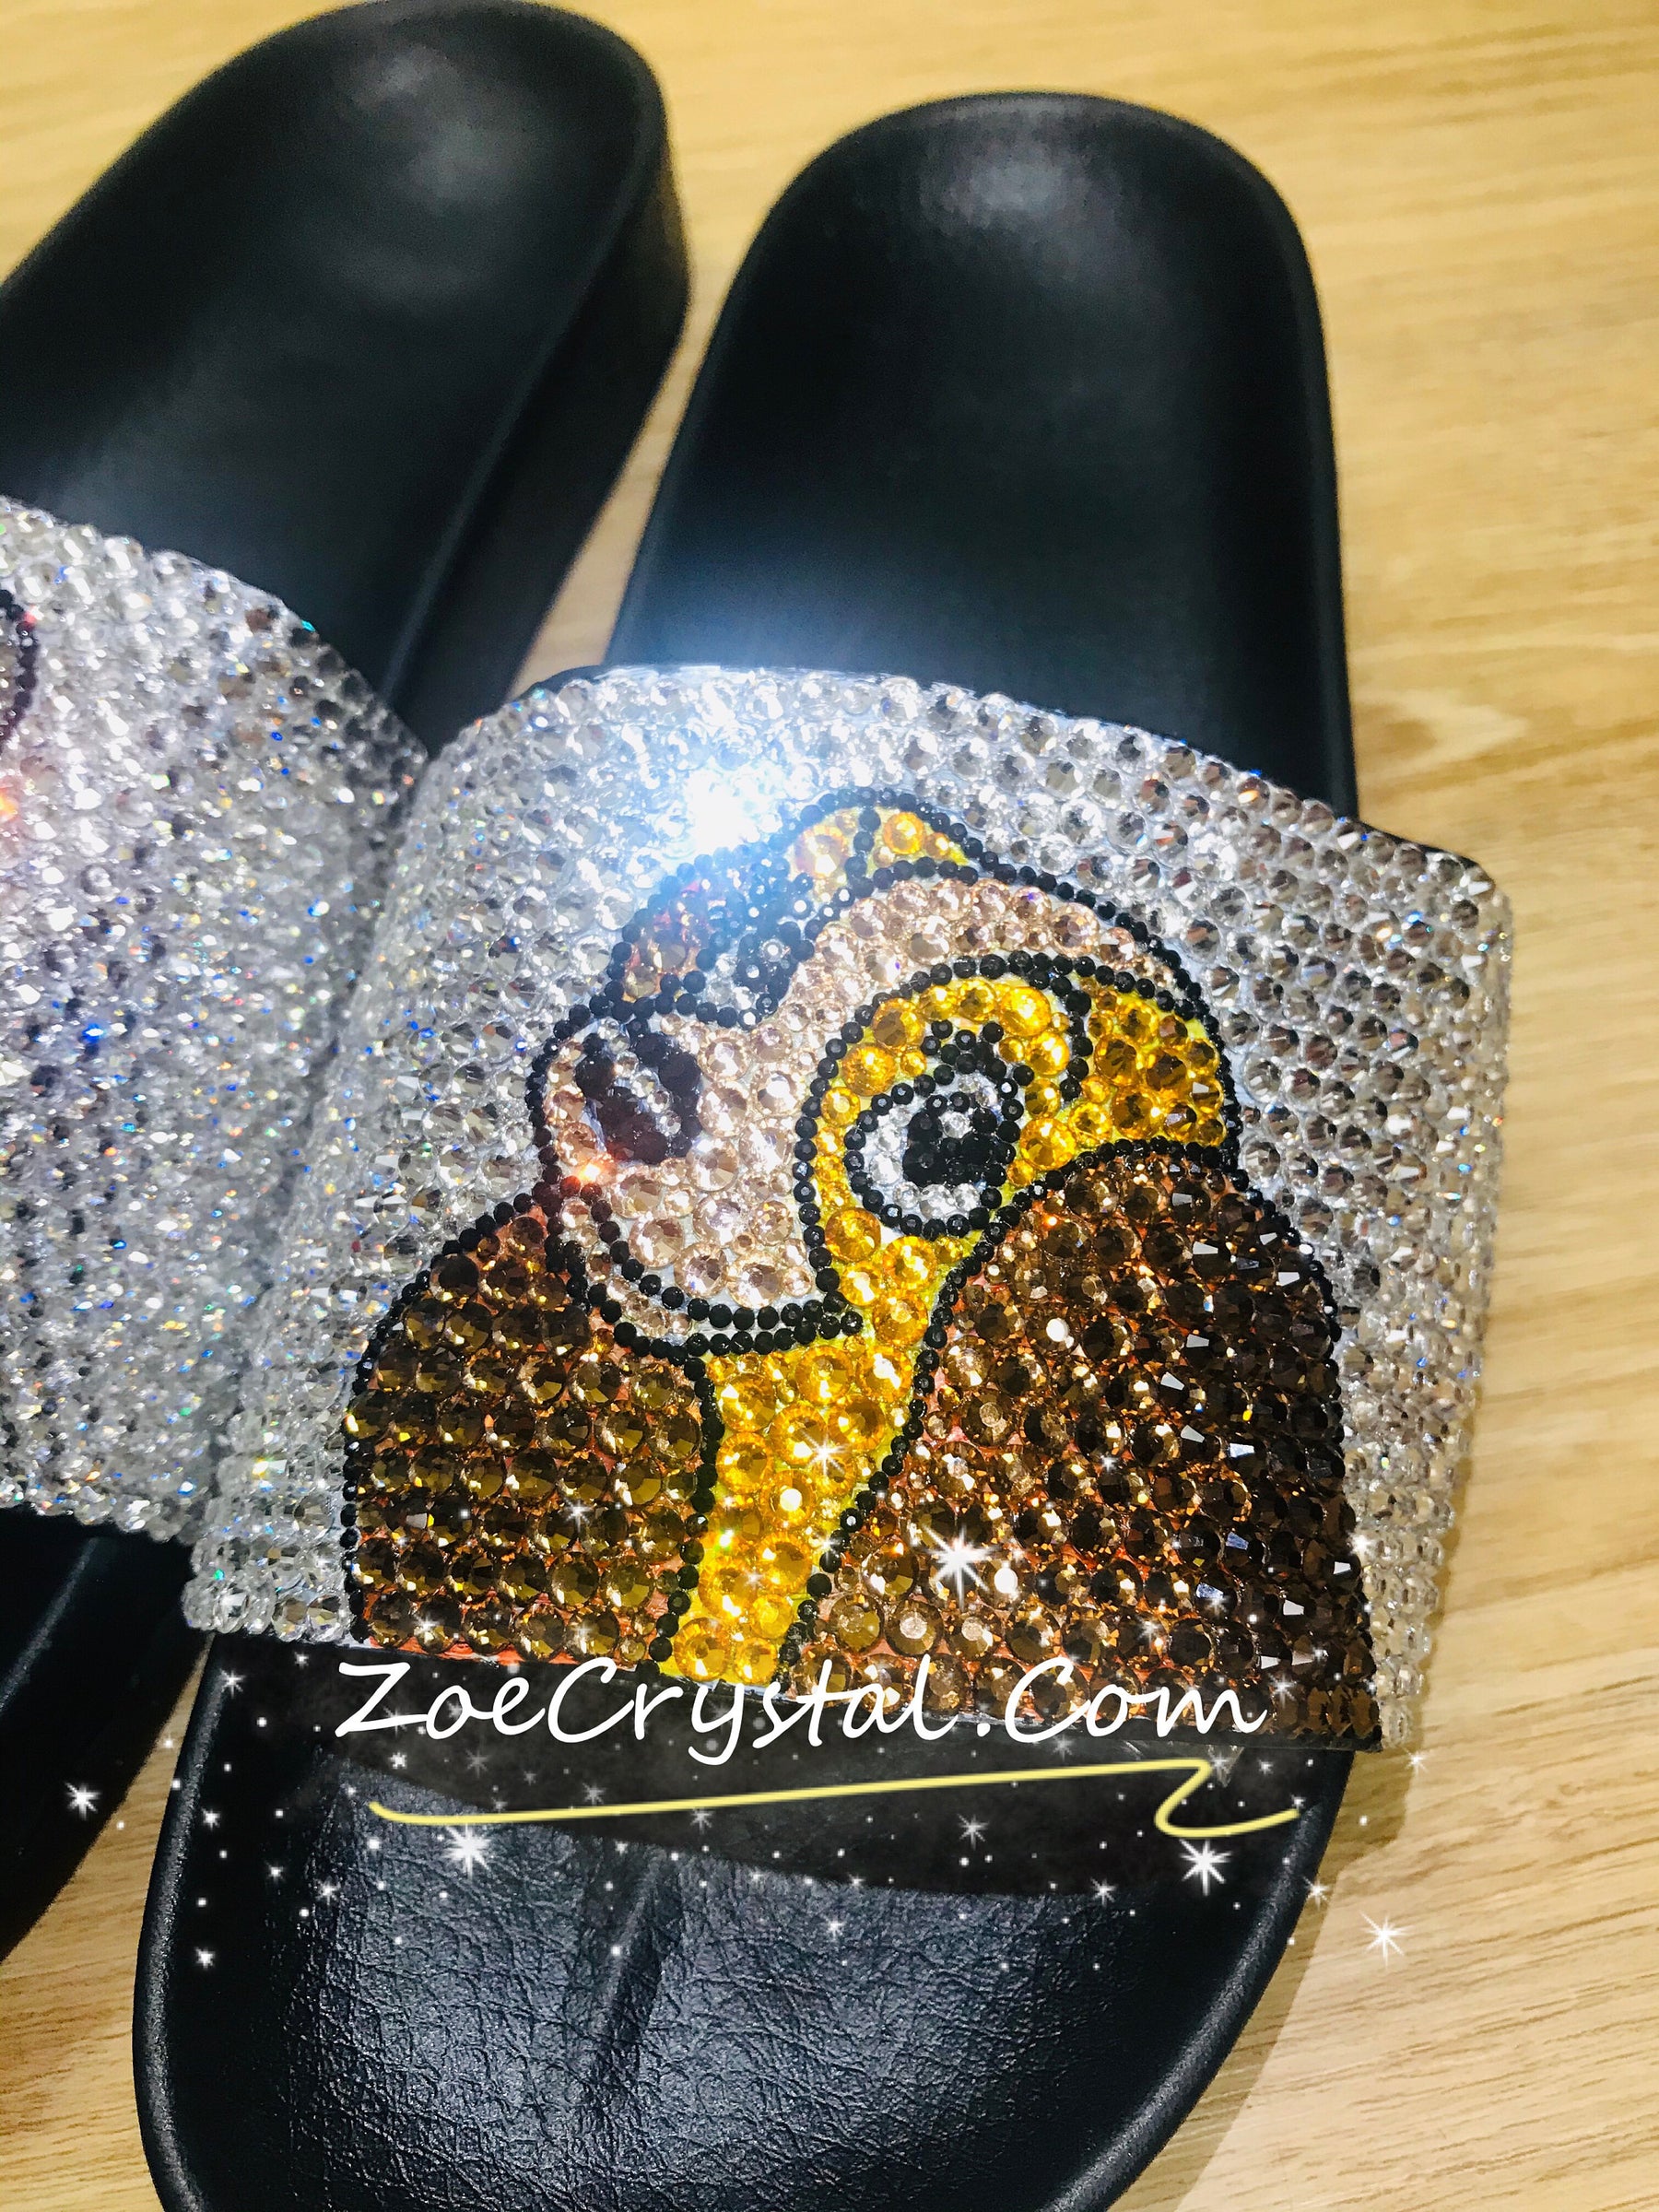 Customize Your SANDALS SLIDES Slippers in Summer Beach, Wedding, Fashion - Example of Lady and the tramp - Bedazzled Swarovski Rhinestone